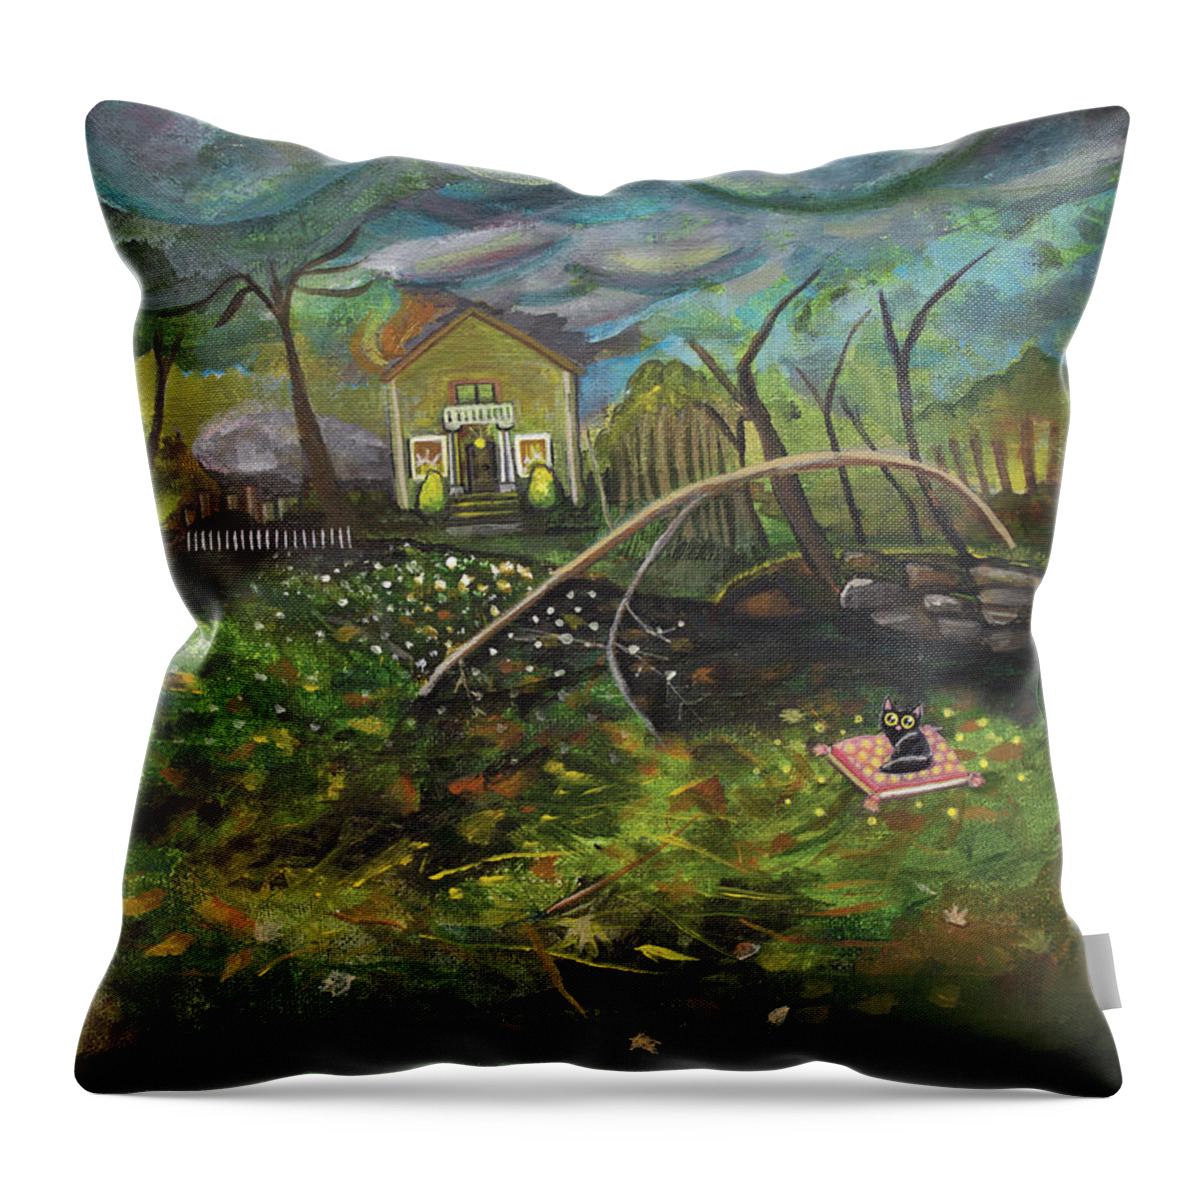 Procrastination Throw Pillow featuring the painting A Deadline Approaches by Mindy Huntress